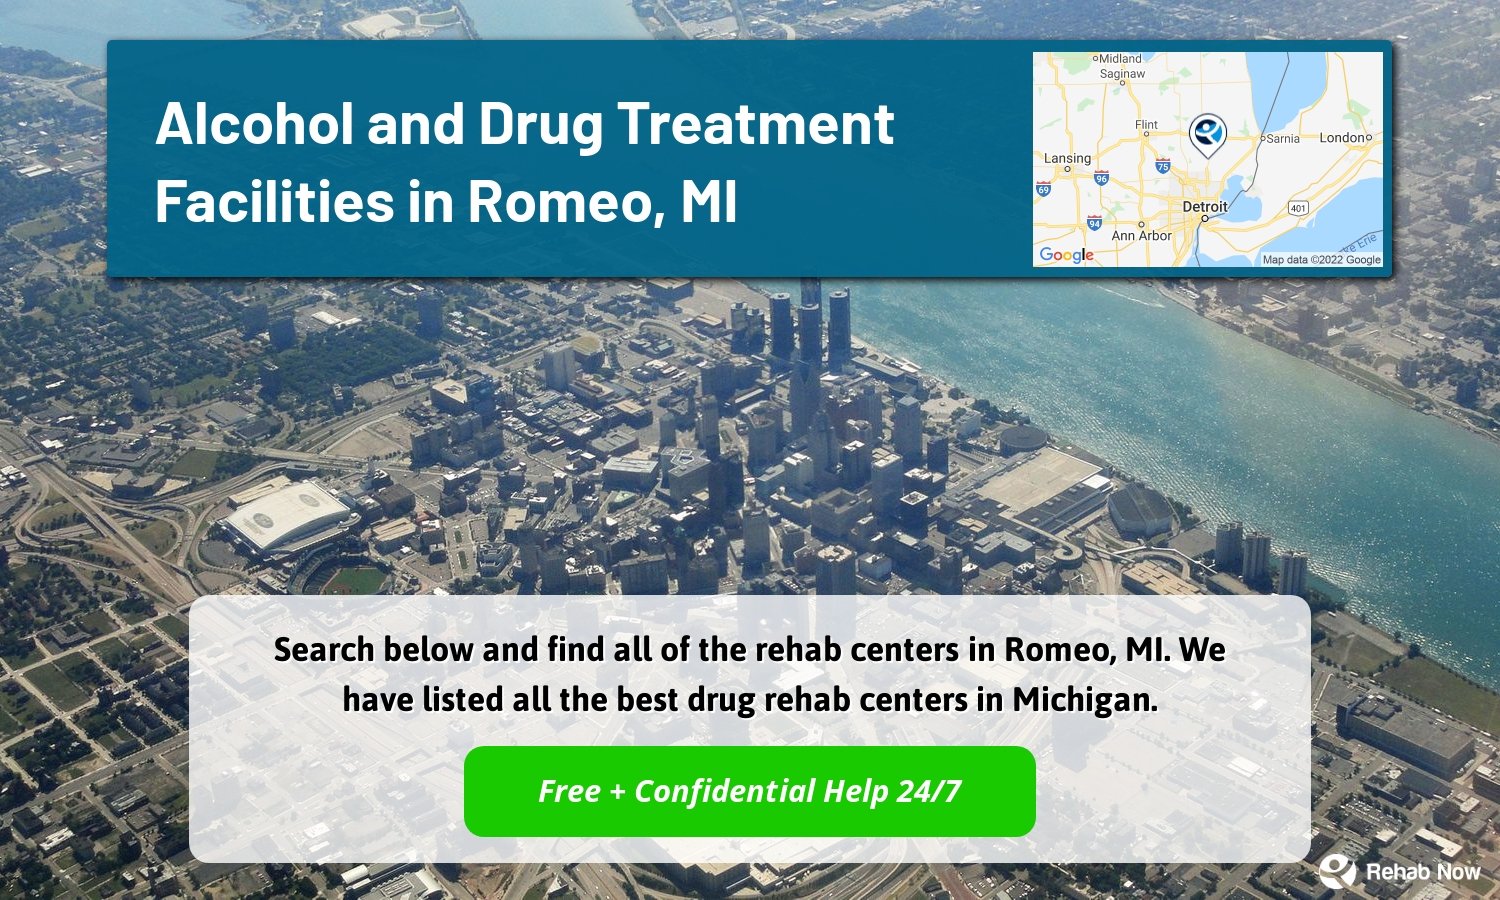 Search below and find all of the rehab centers in Romeo, MI. We have listed all the best drug rehab centers in Michigan.